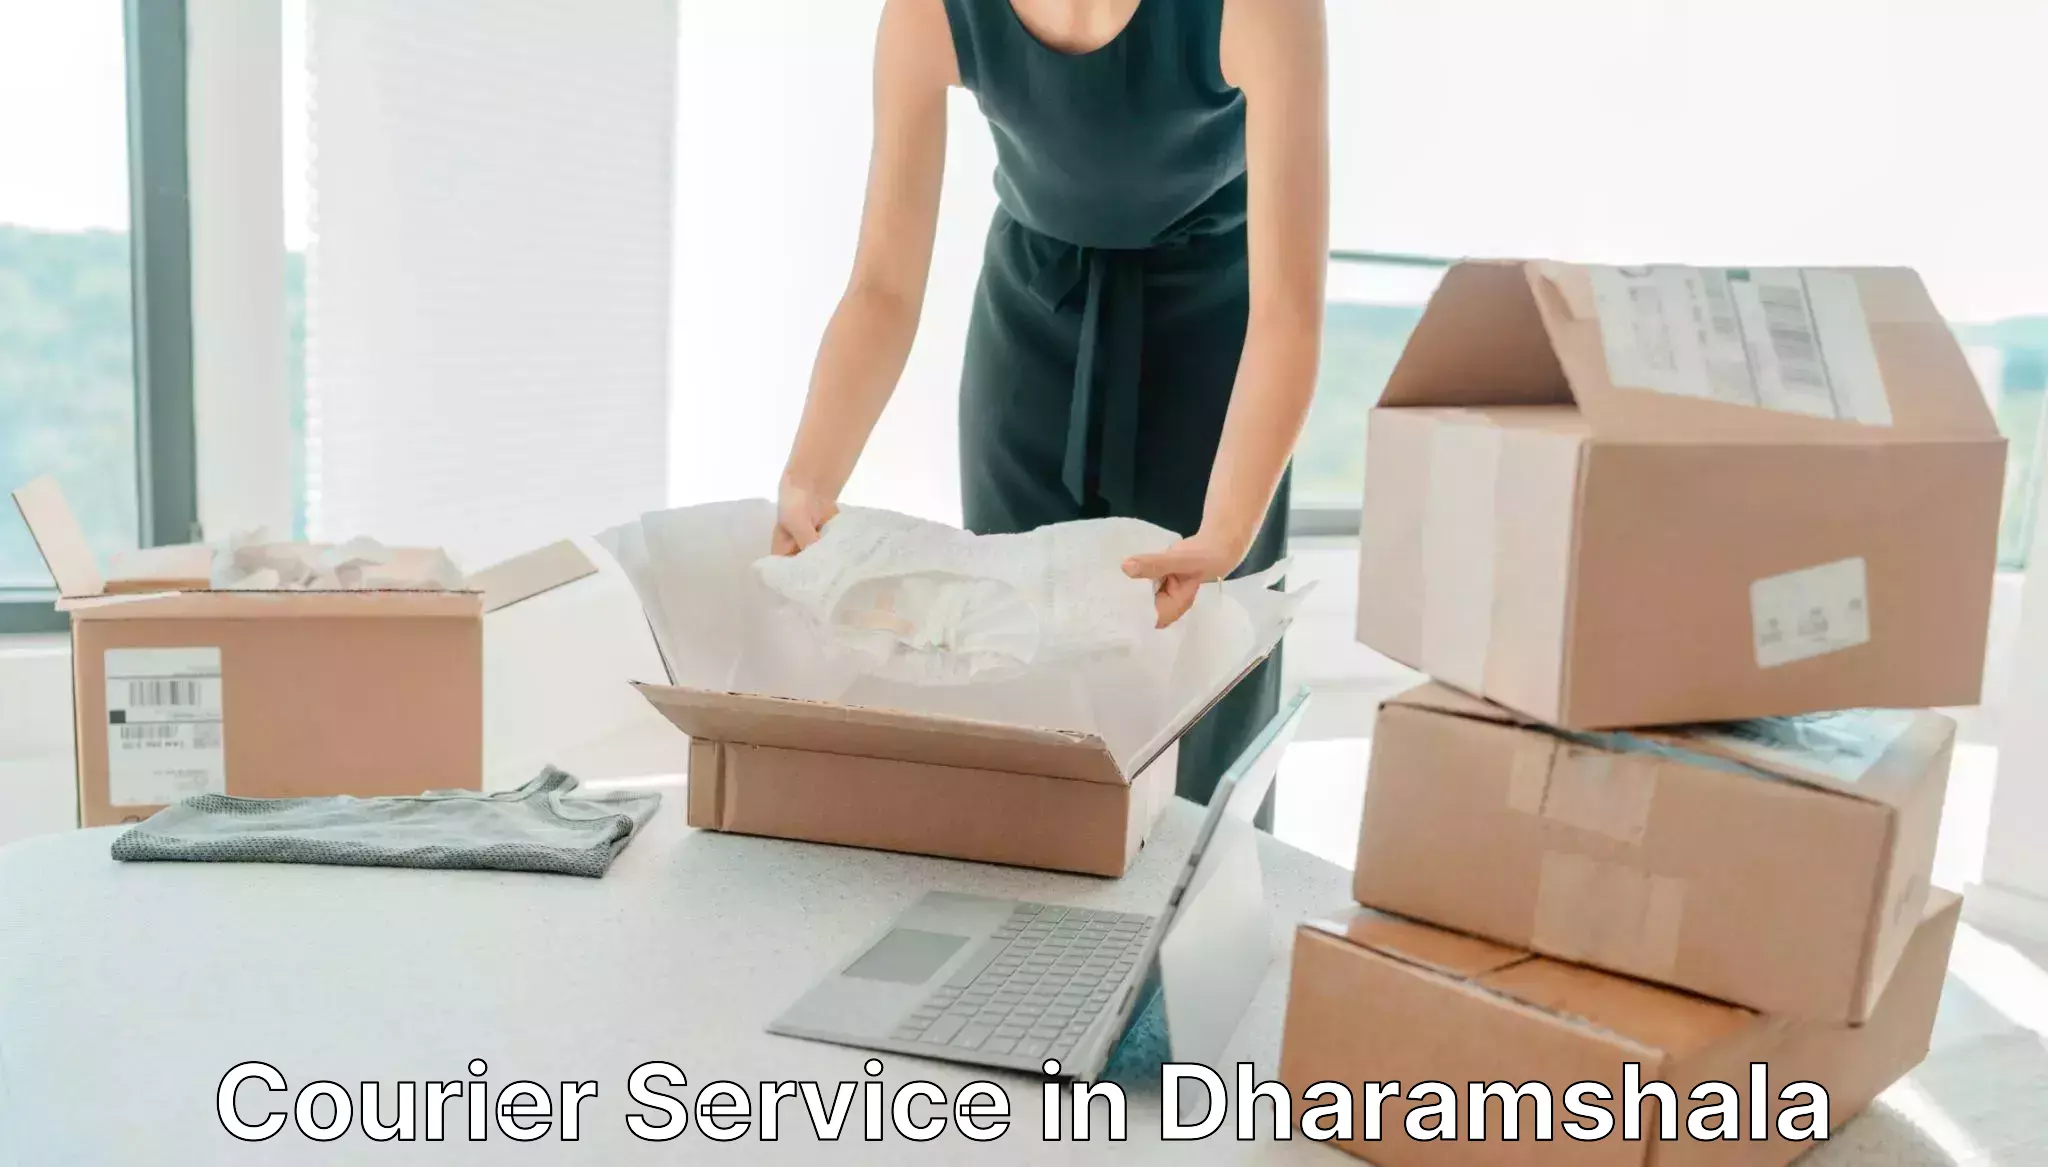 Same-day delivery solutions in Dharamshala